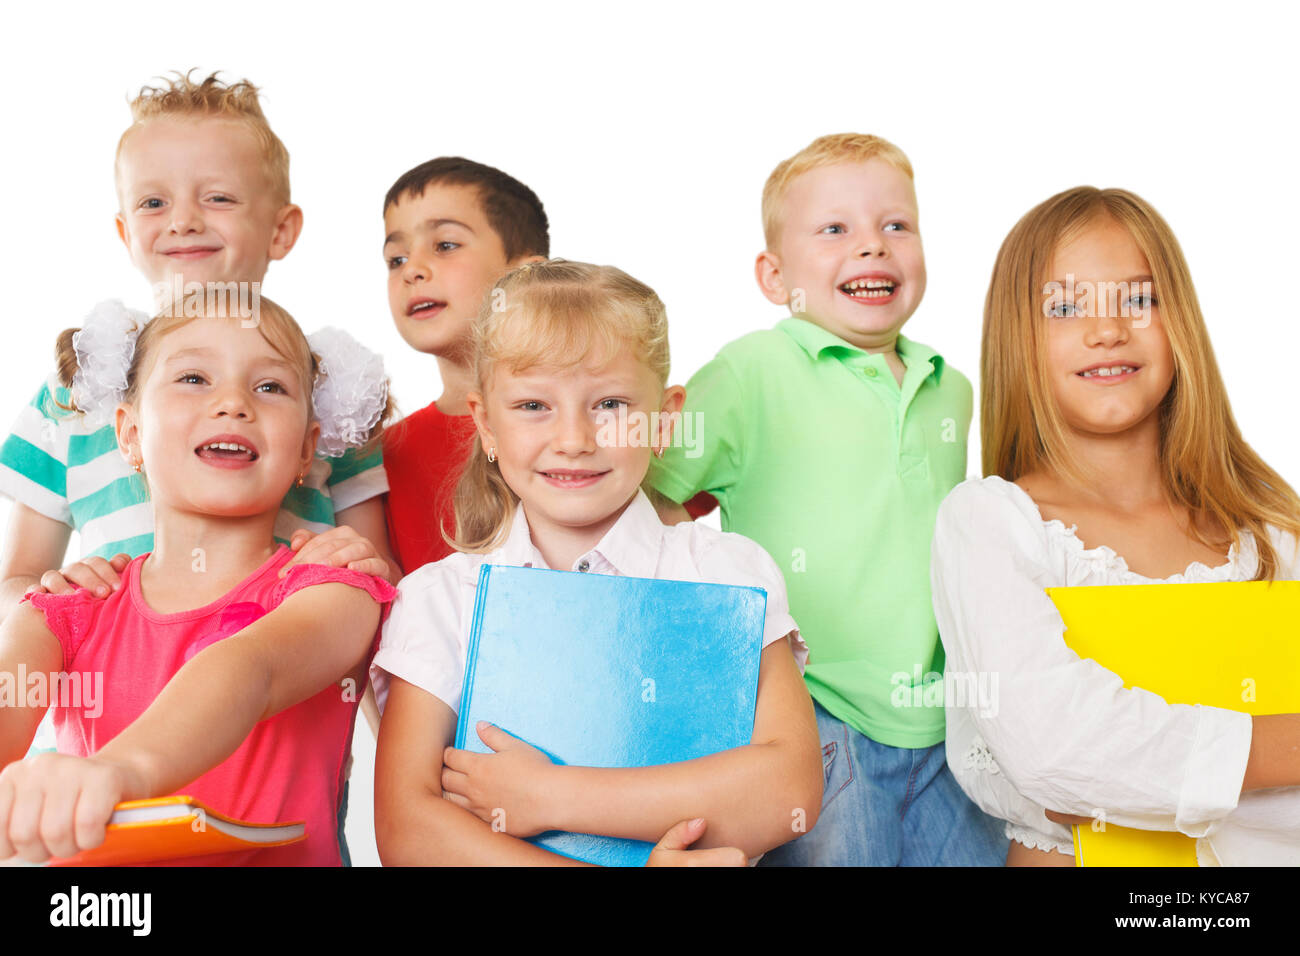 Group of preschoolers with books Stock Photo